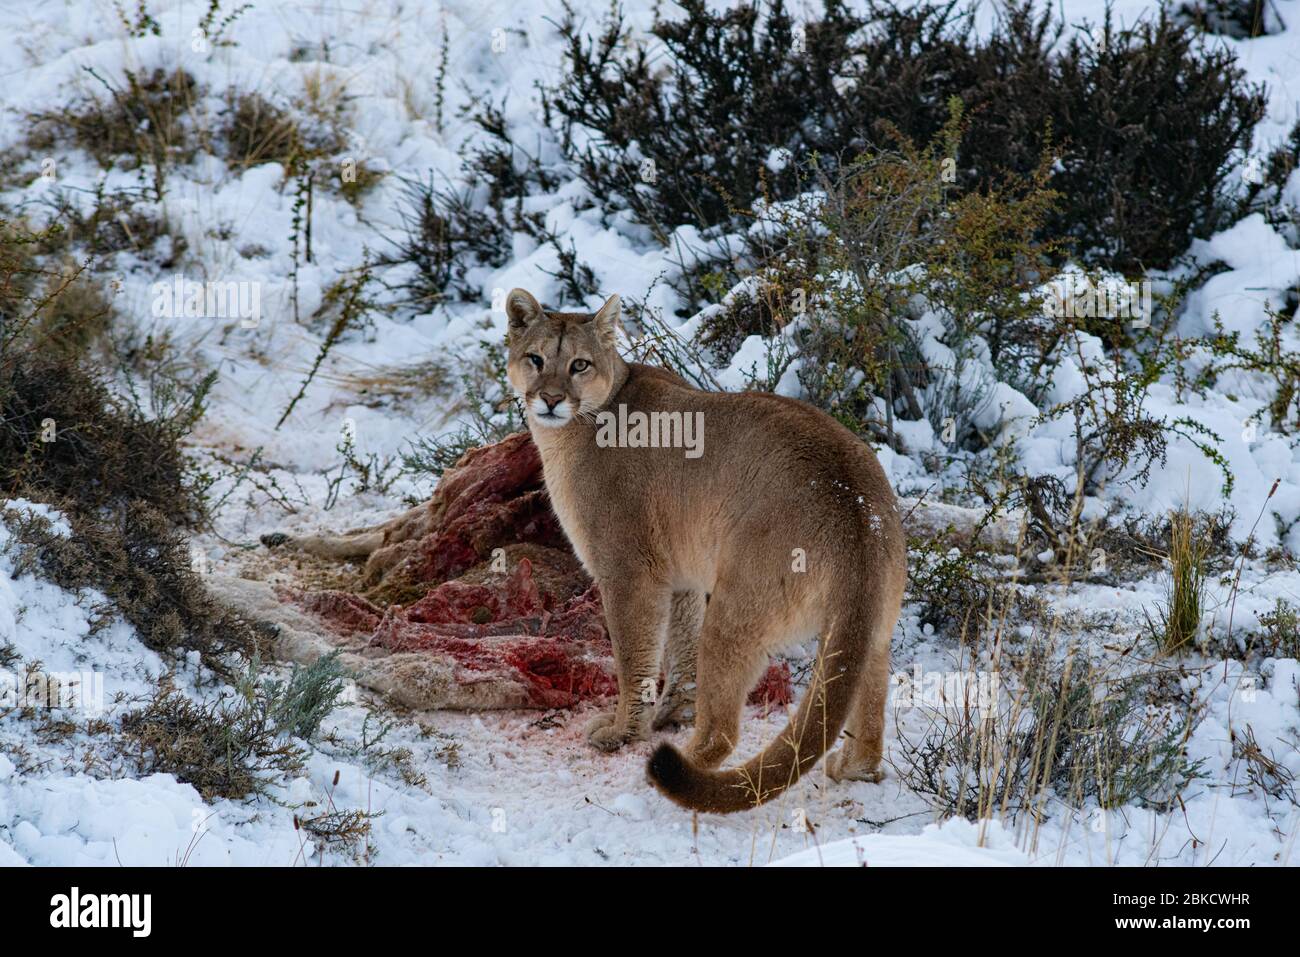 puma in the wild in Torres del paine National Park, approaching the body of  a dead guanaco to feed, during the winter surrounded by snow Stock Photo -  Alamy